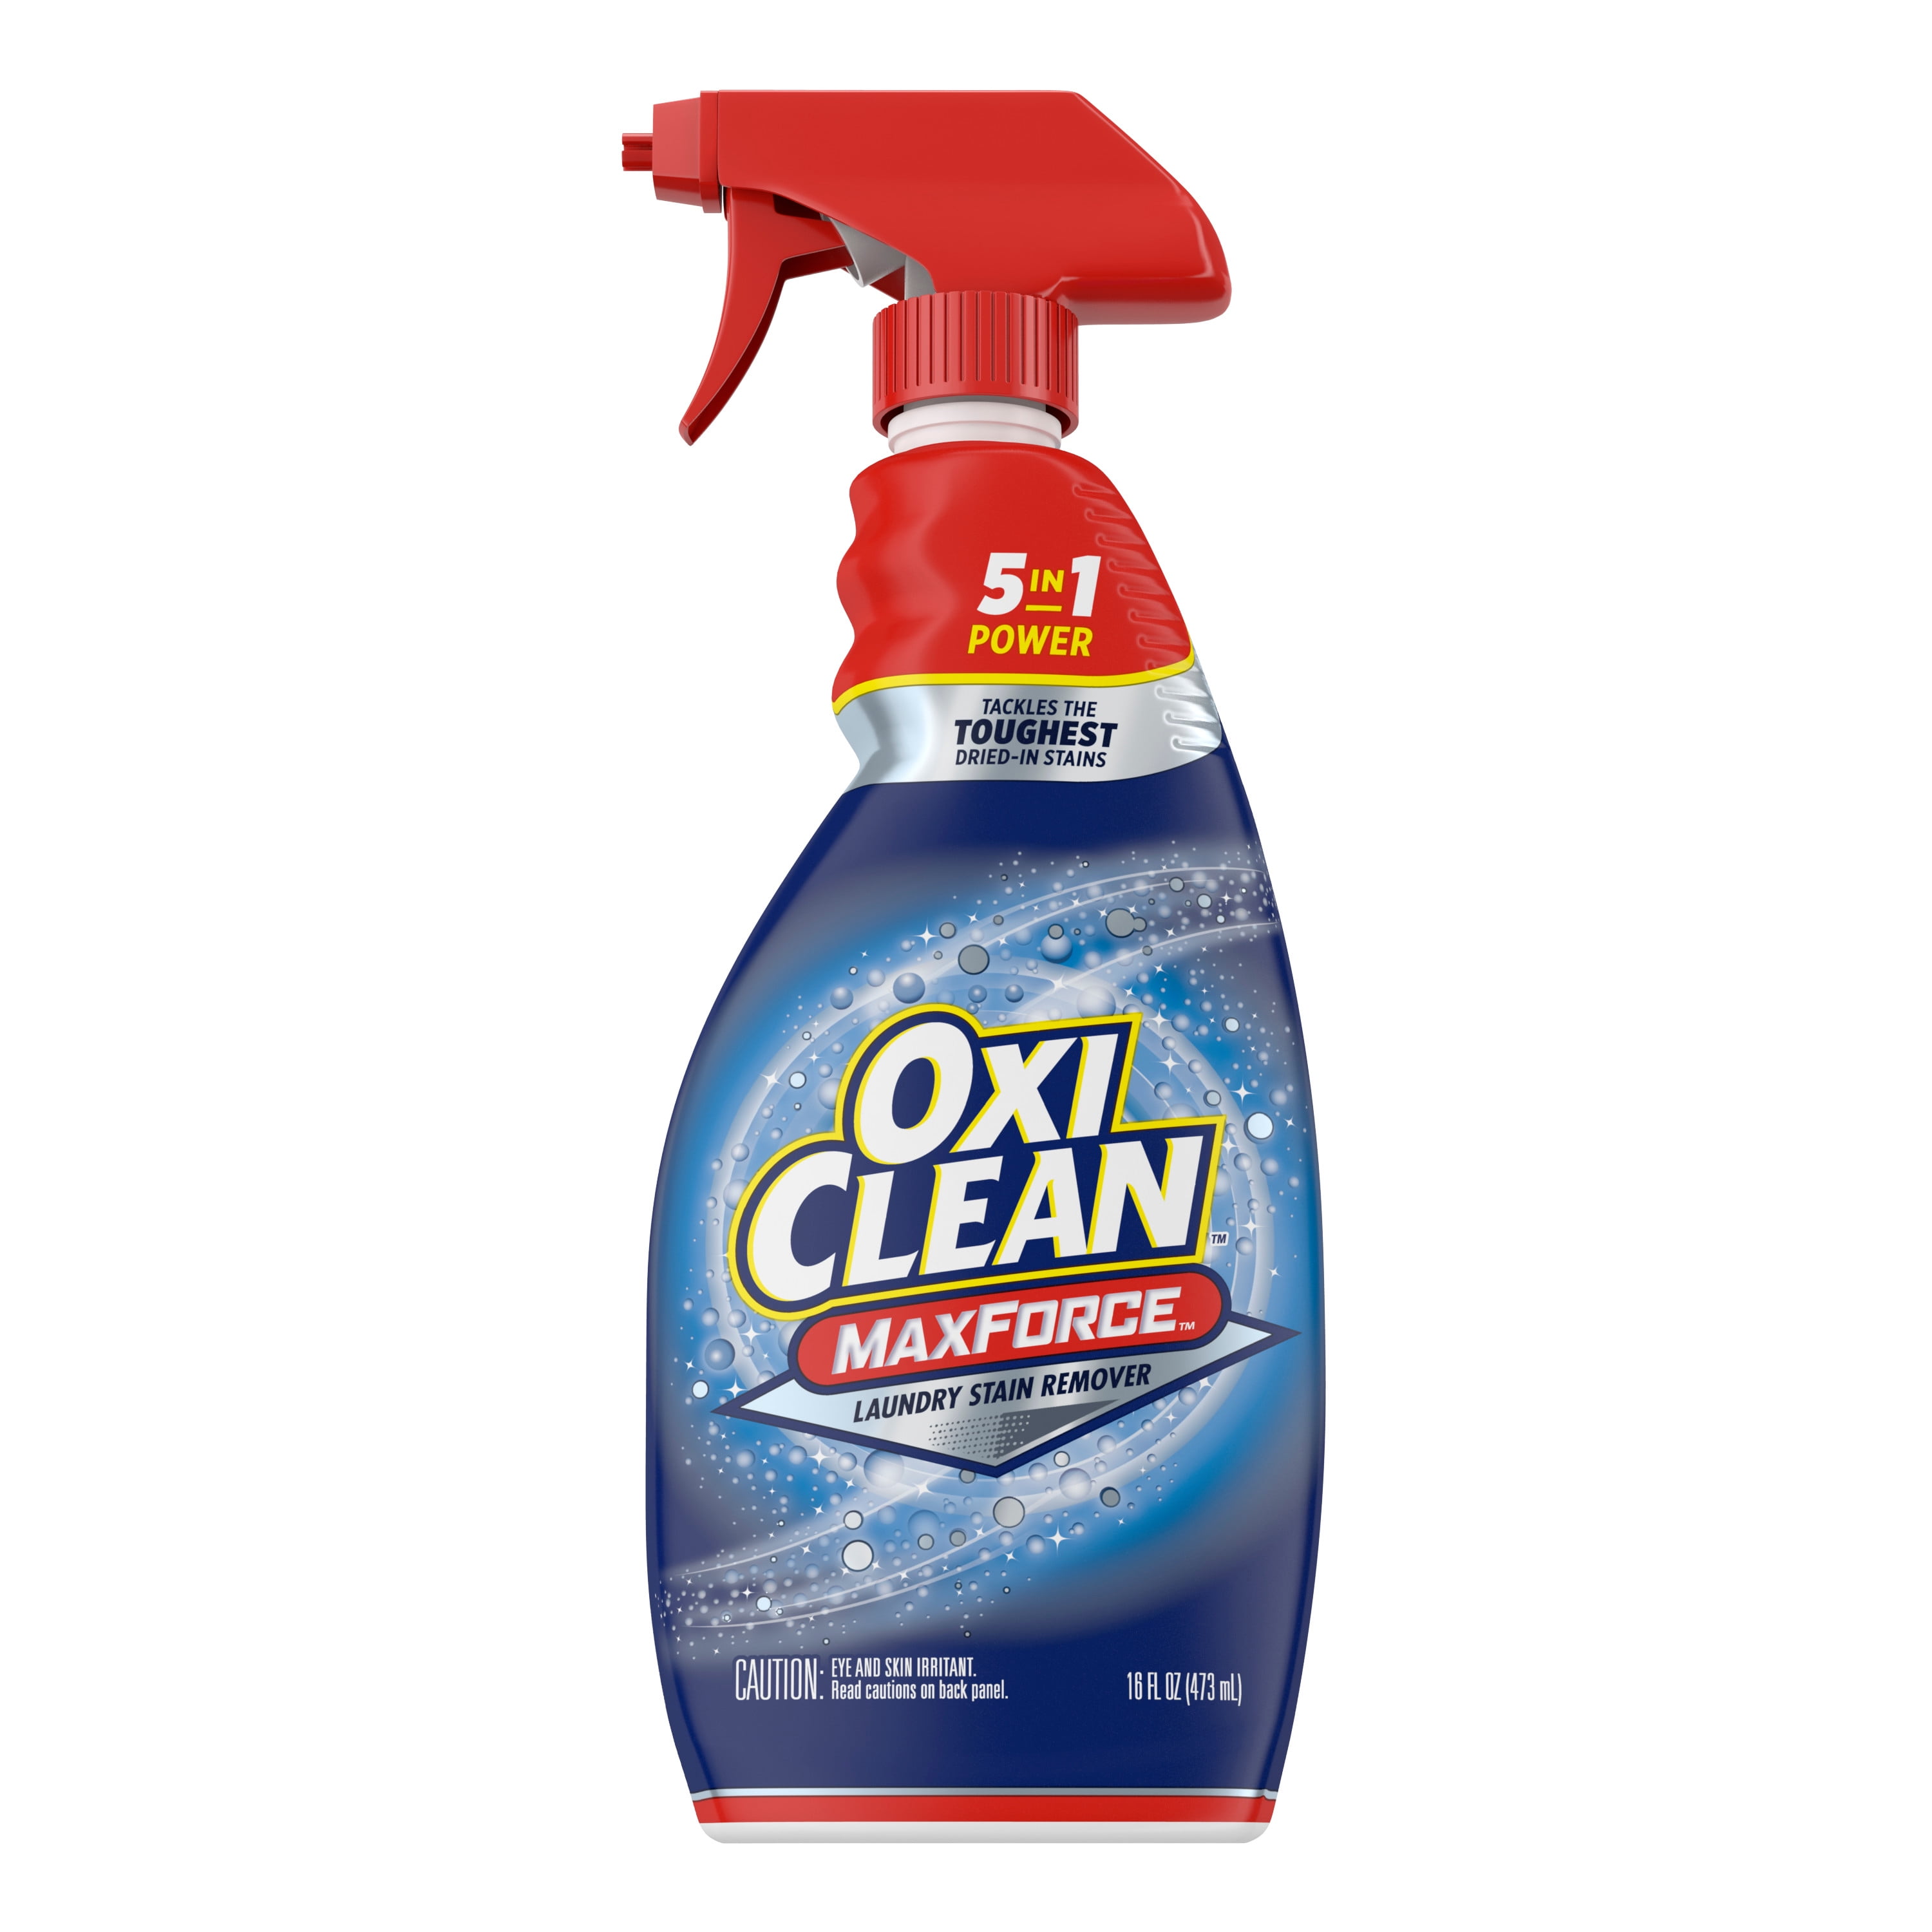 oxiclean-maxforce-laundry-stain-remover-spray-5-in-1-power-clothing